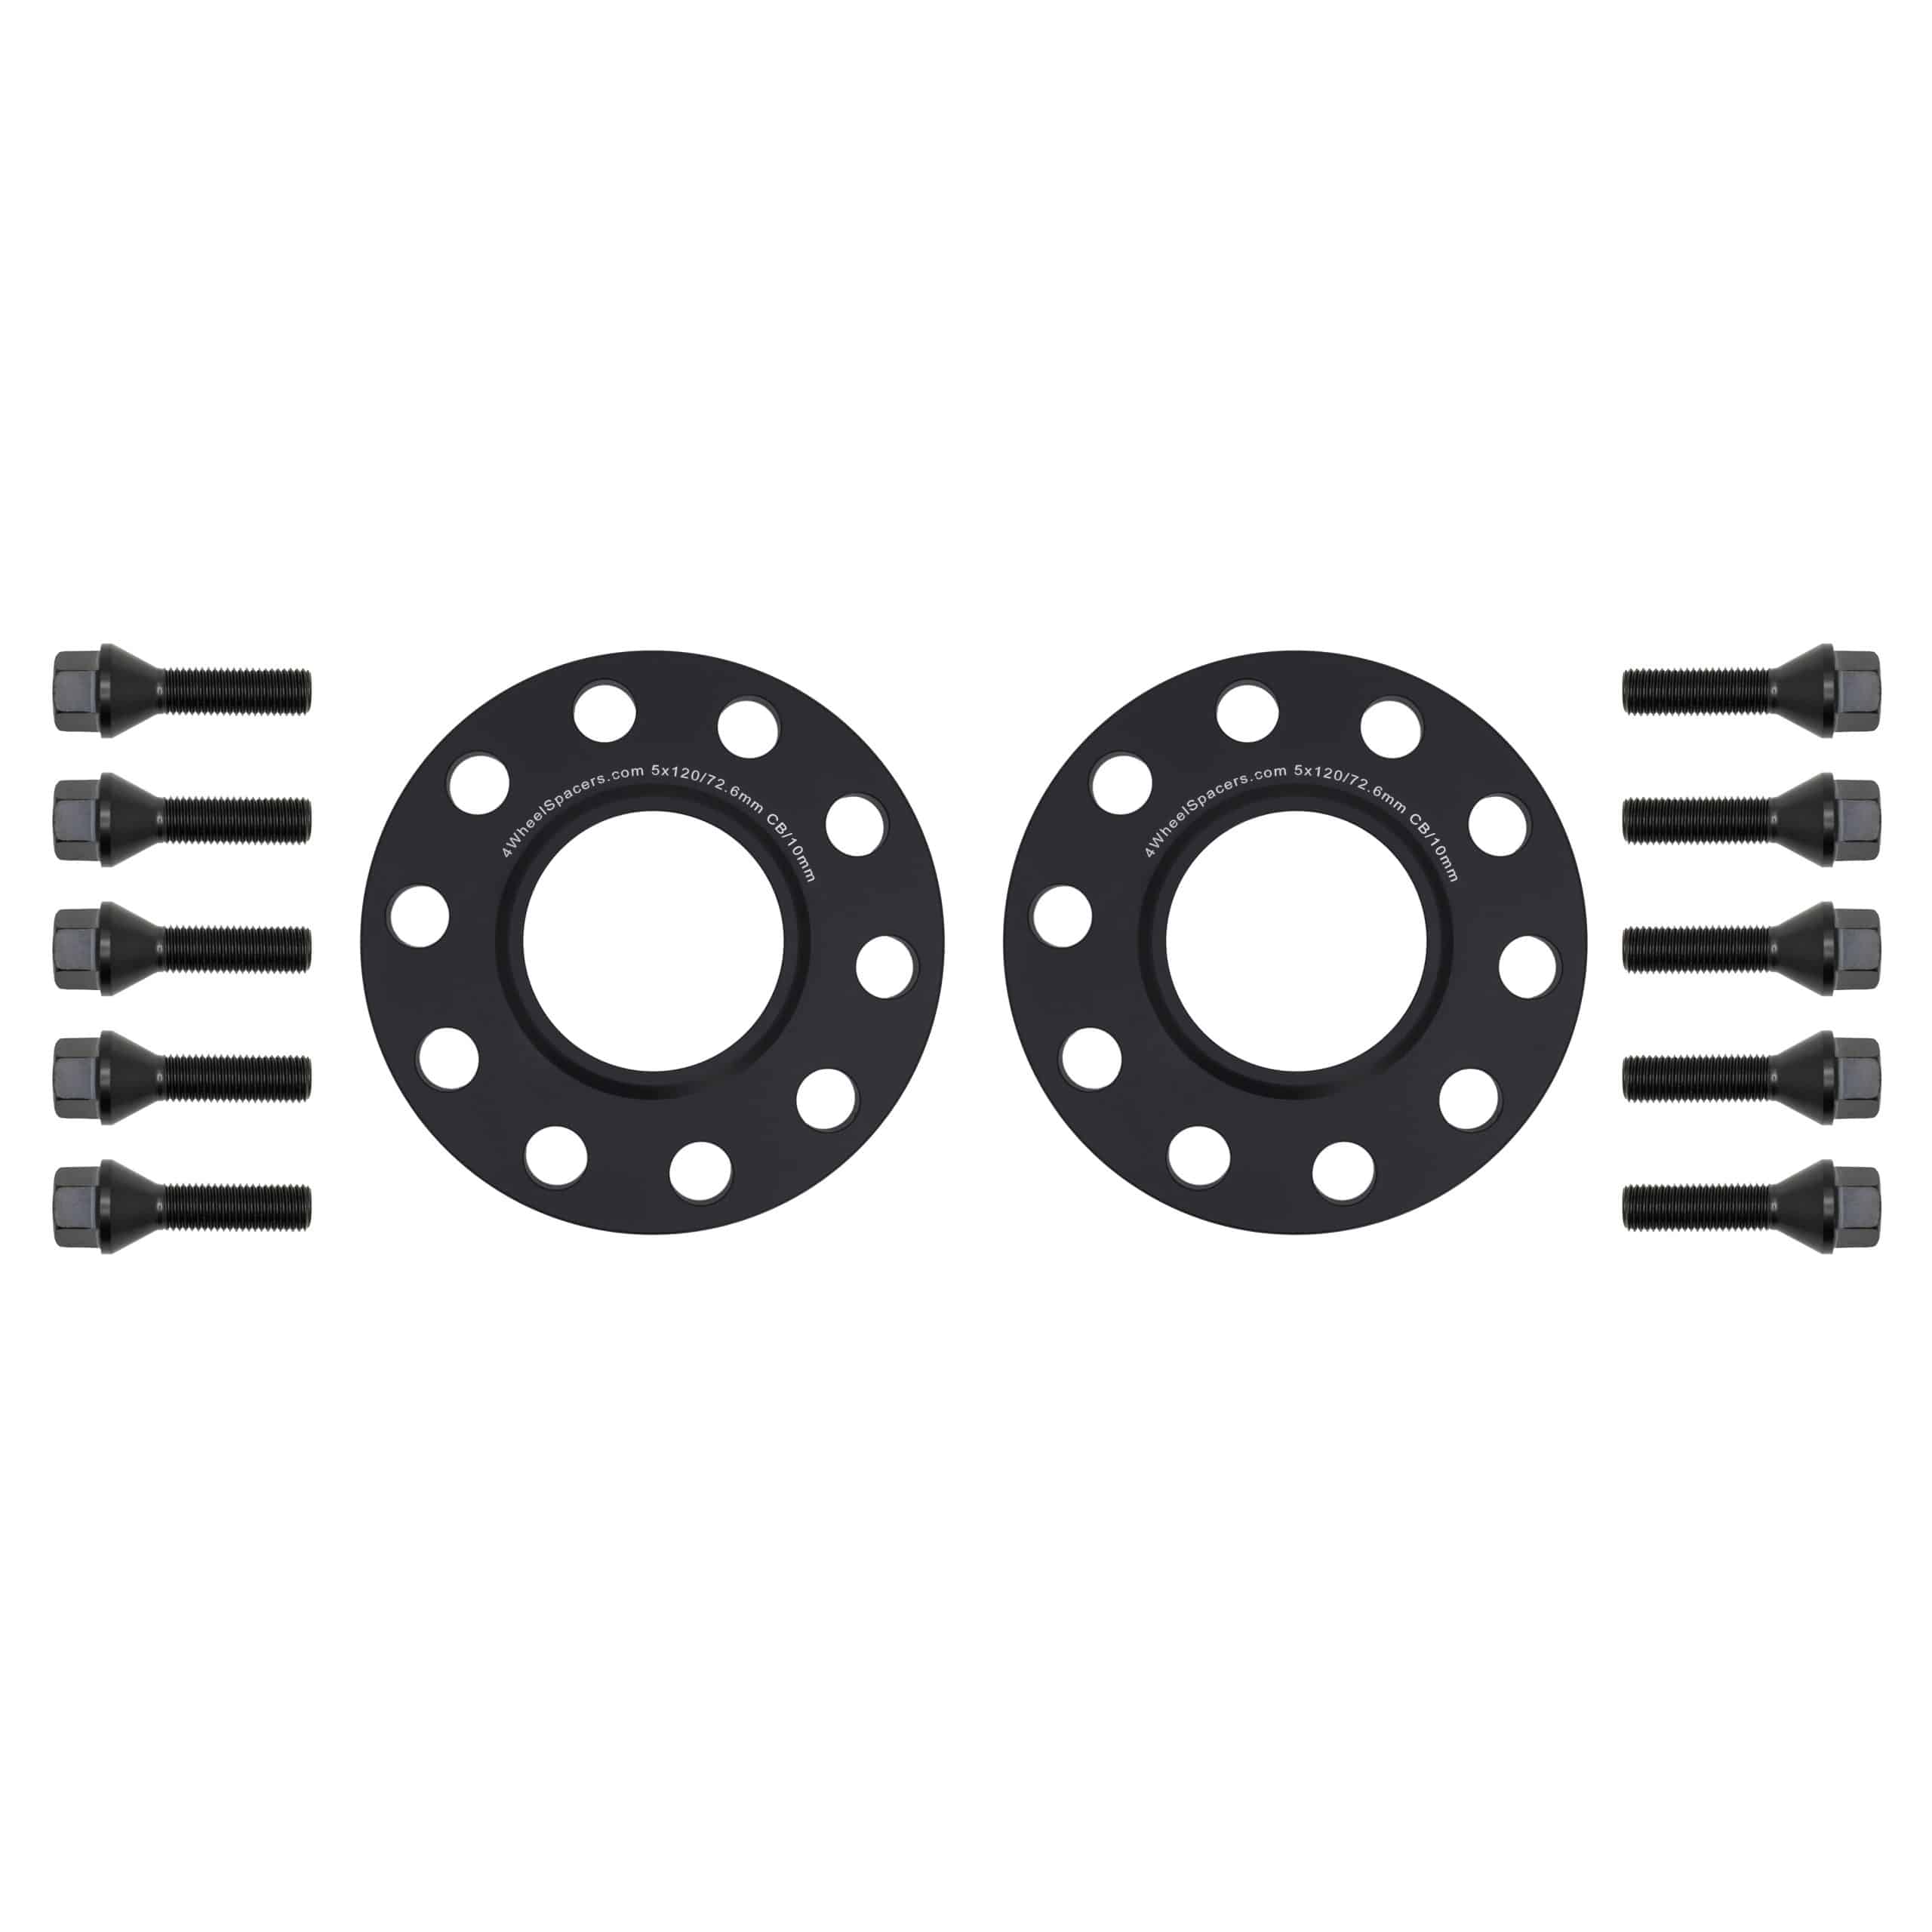 BMW 10mm Hub-Centric Wheel Spacers and Bolt Kit, 4WheelSpacers.com